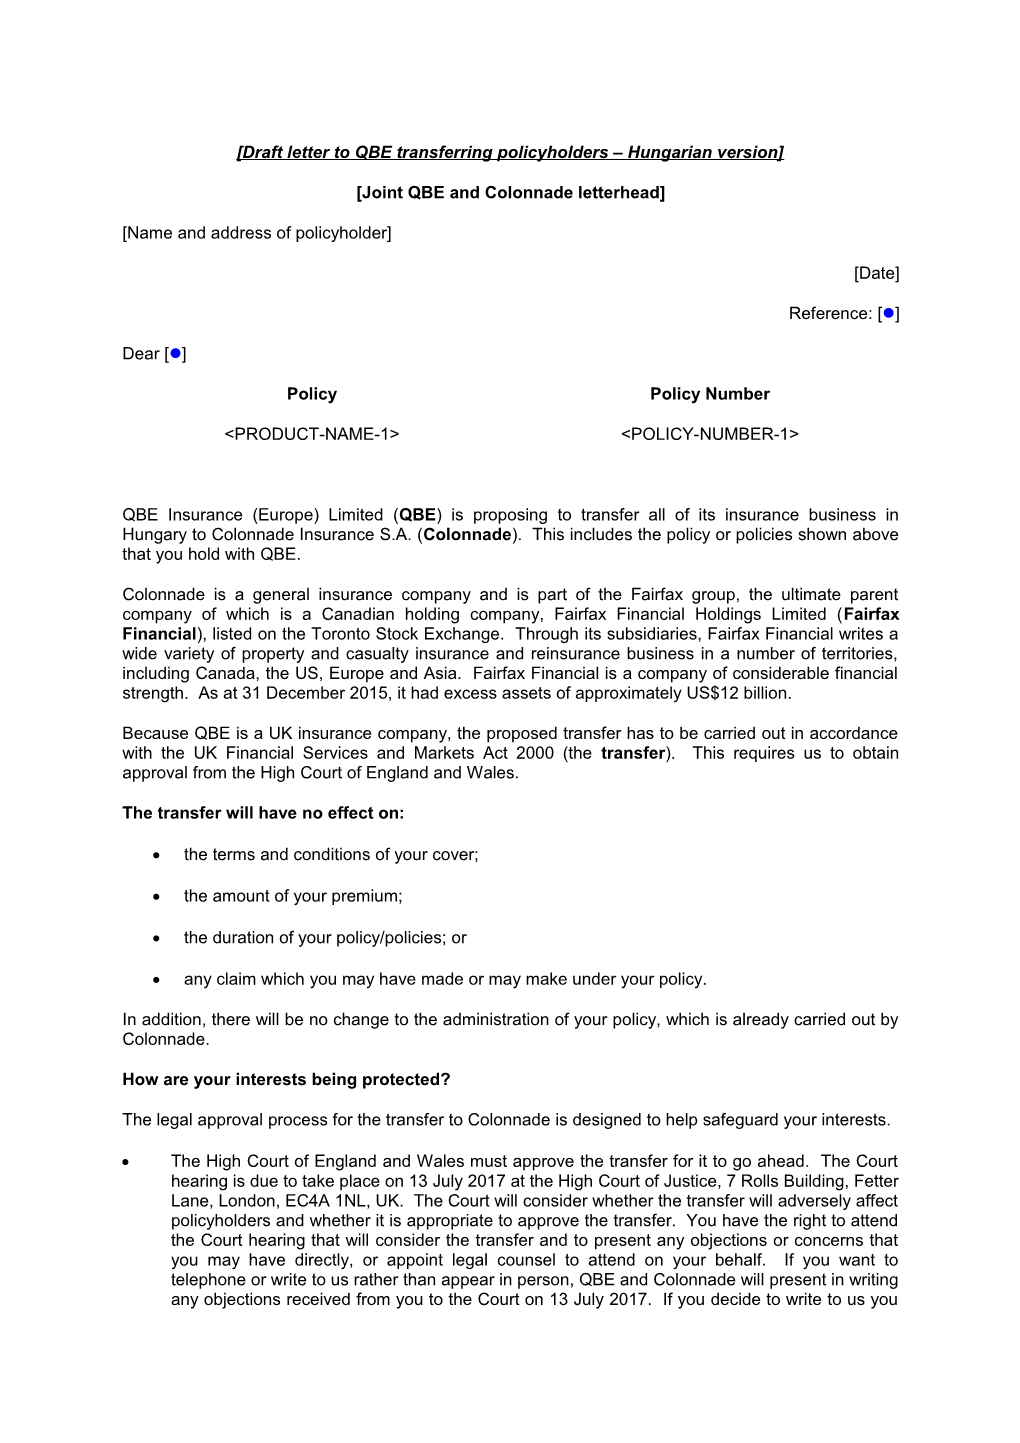 Draft Letter to QBE Transferring Policyholders Hungarian Version